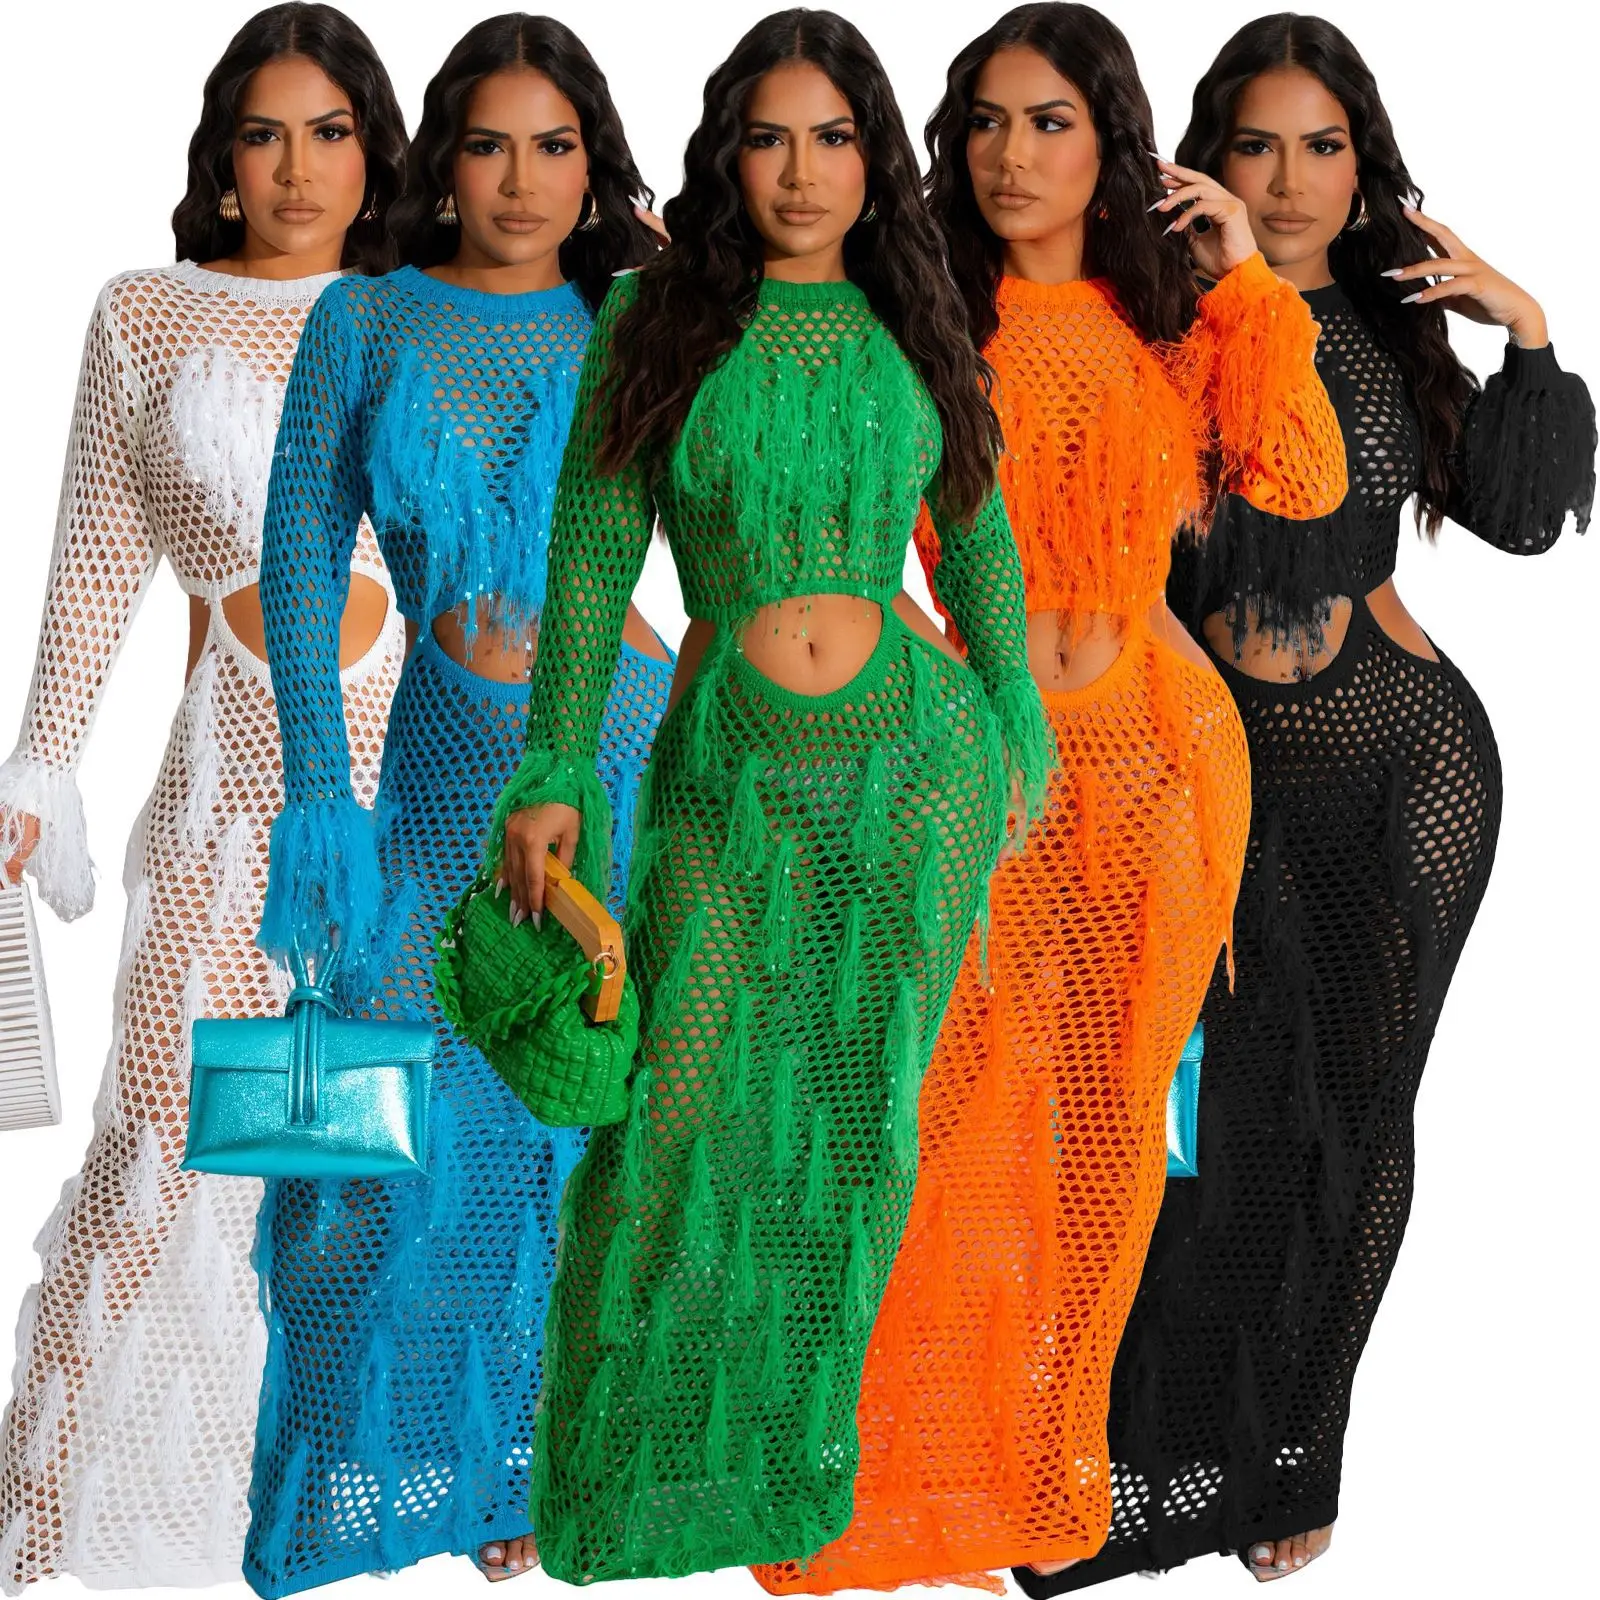 

Crochet Knitted Women Beach Cover Ups Sequin Solid Long Sleeve Fishnet Maxi Dress Sexy Hollow Out Tassel Summer Vacation Outfits